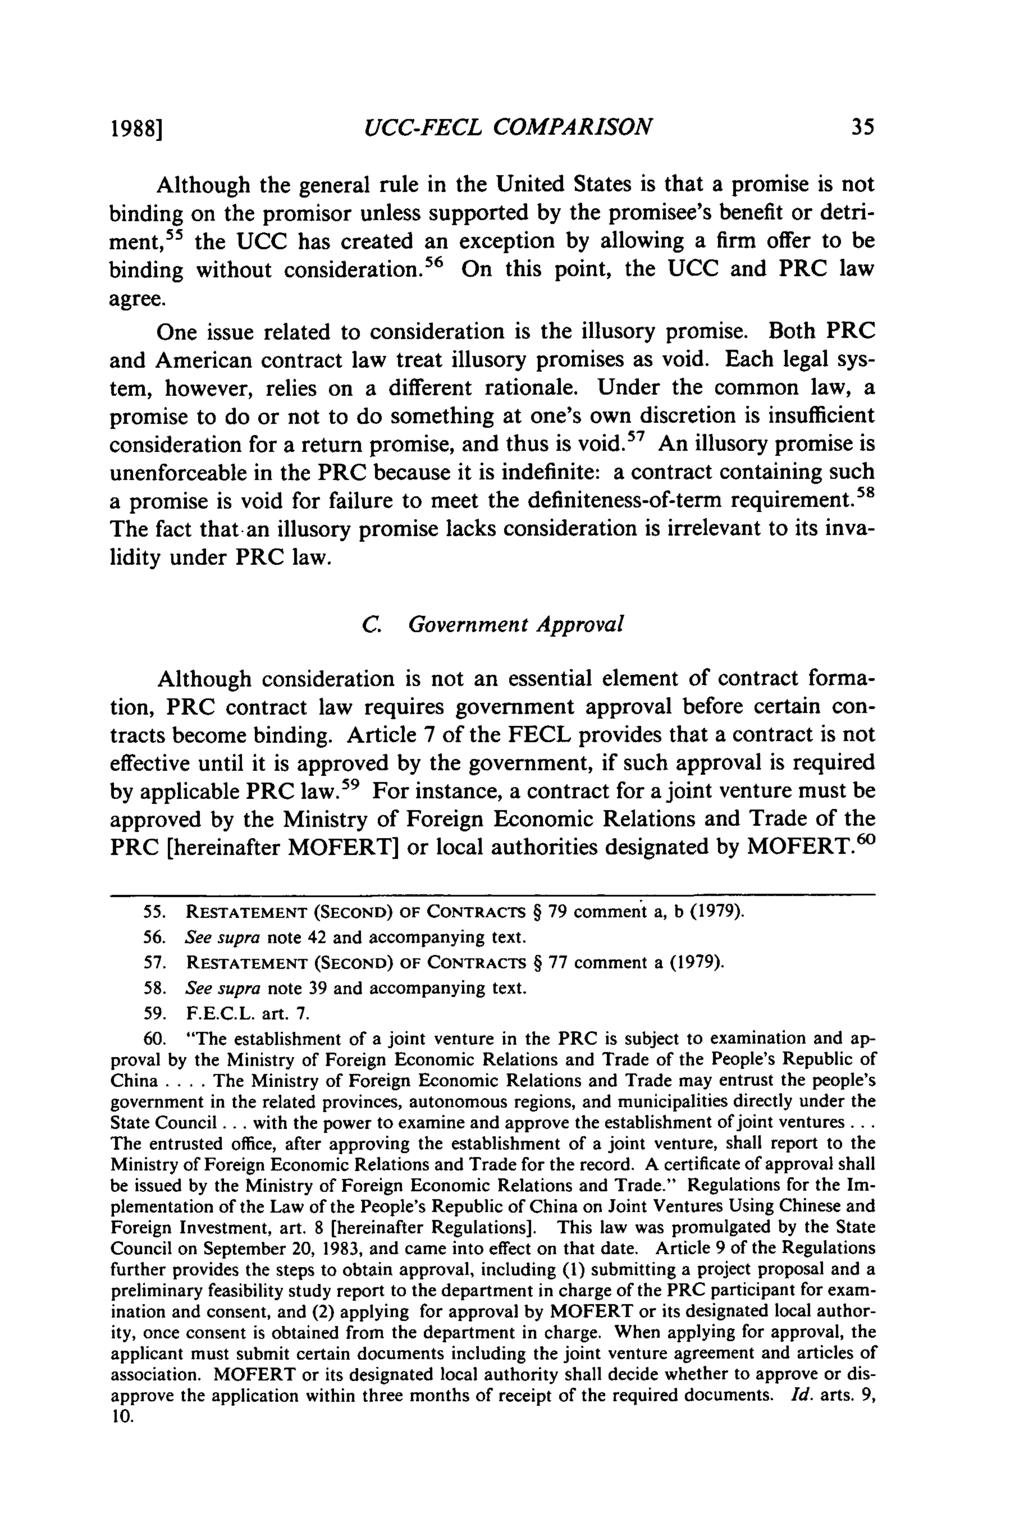 1988] UCC-FECL COMPARISON Although the general rule in the United States is that a promise is not binding on the promisor unless supported by the promisee's benefit or detriment, 55 the UCC has